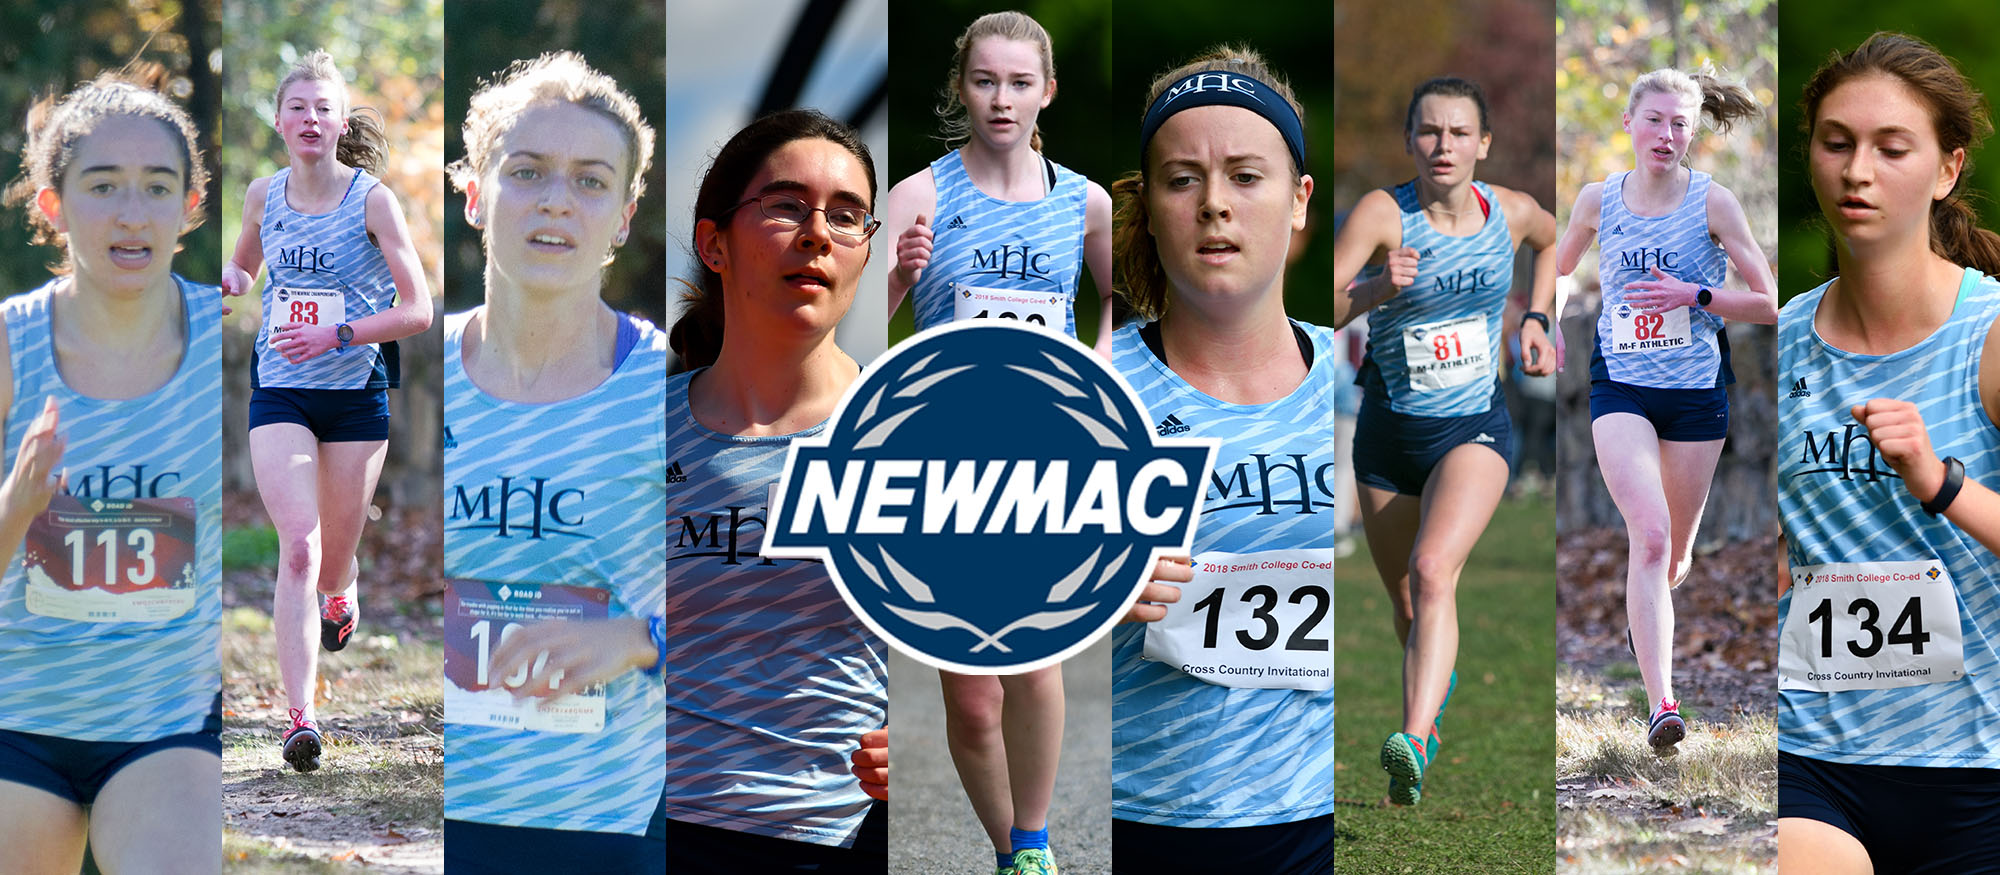 Nine Cross Country Student-Athletes Earn NEWMAC Academic All-Conference Honors